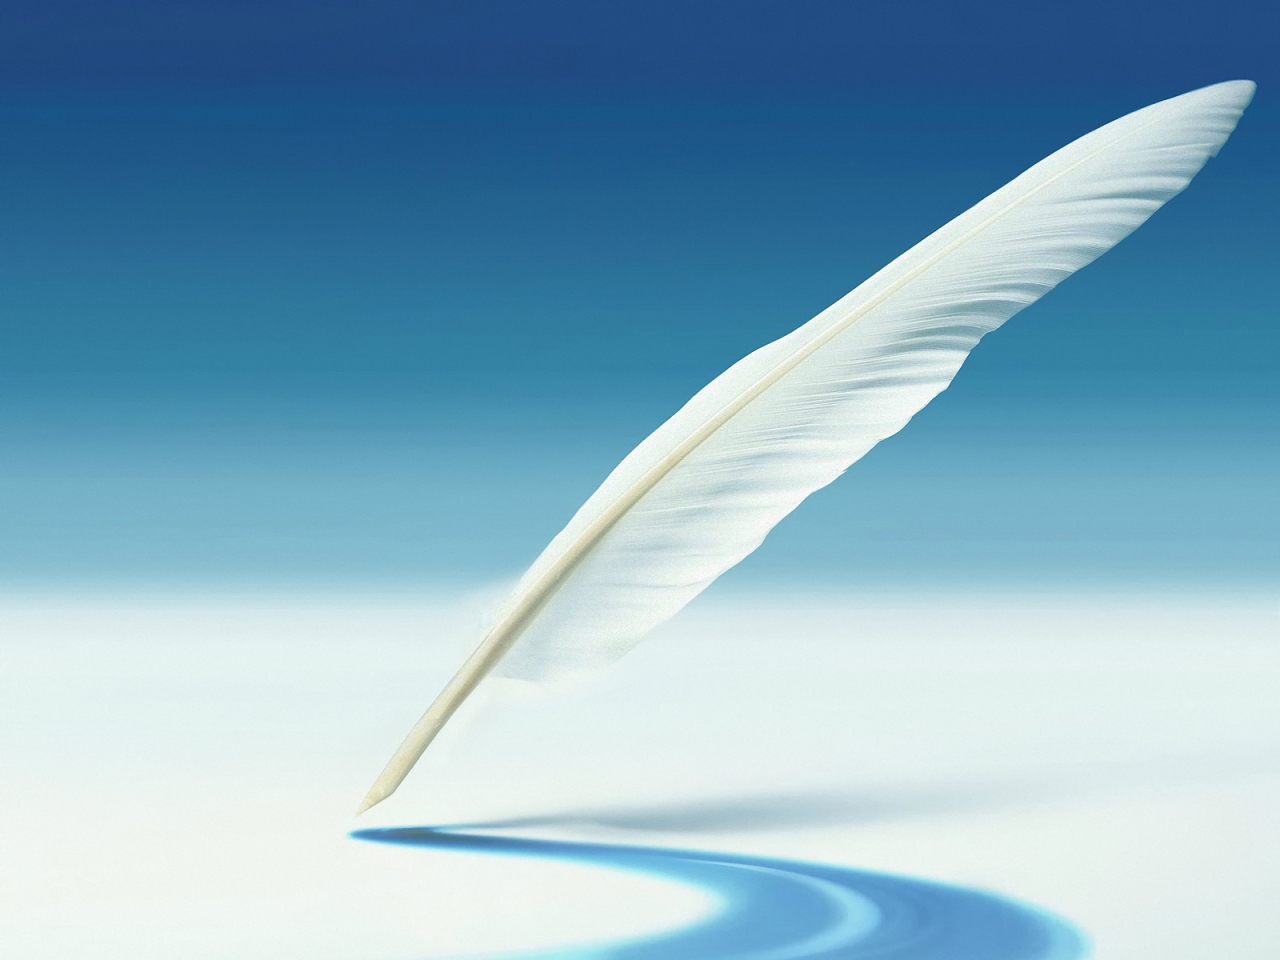 Feather Pen for 1280 x 960 resolution